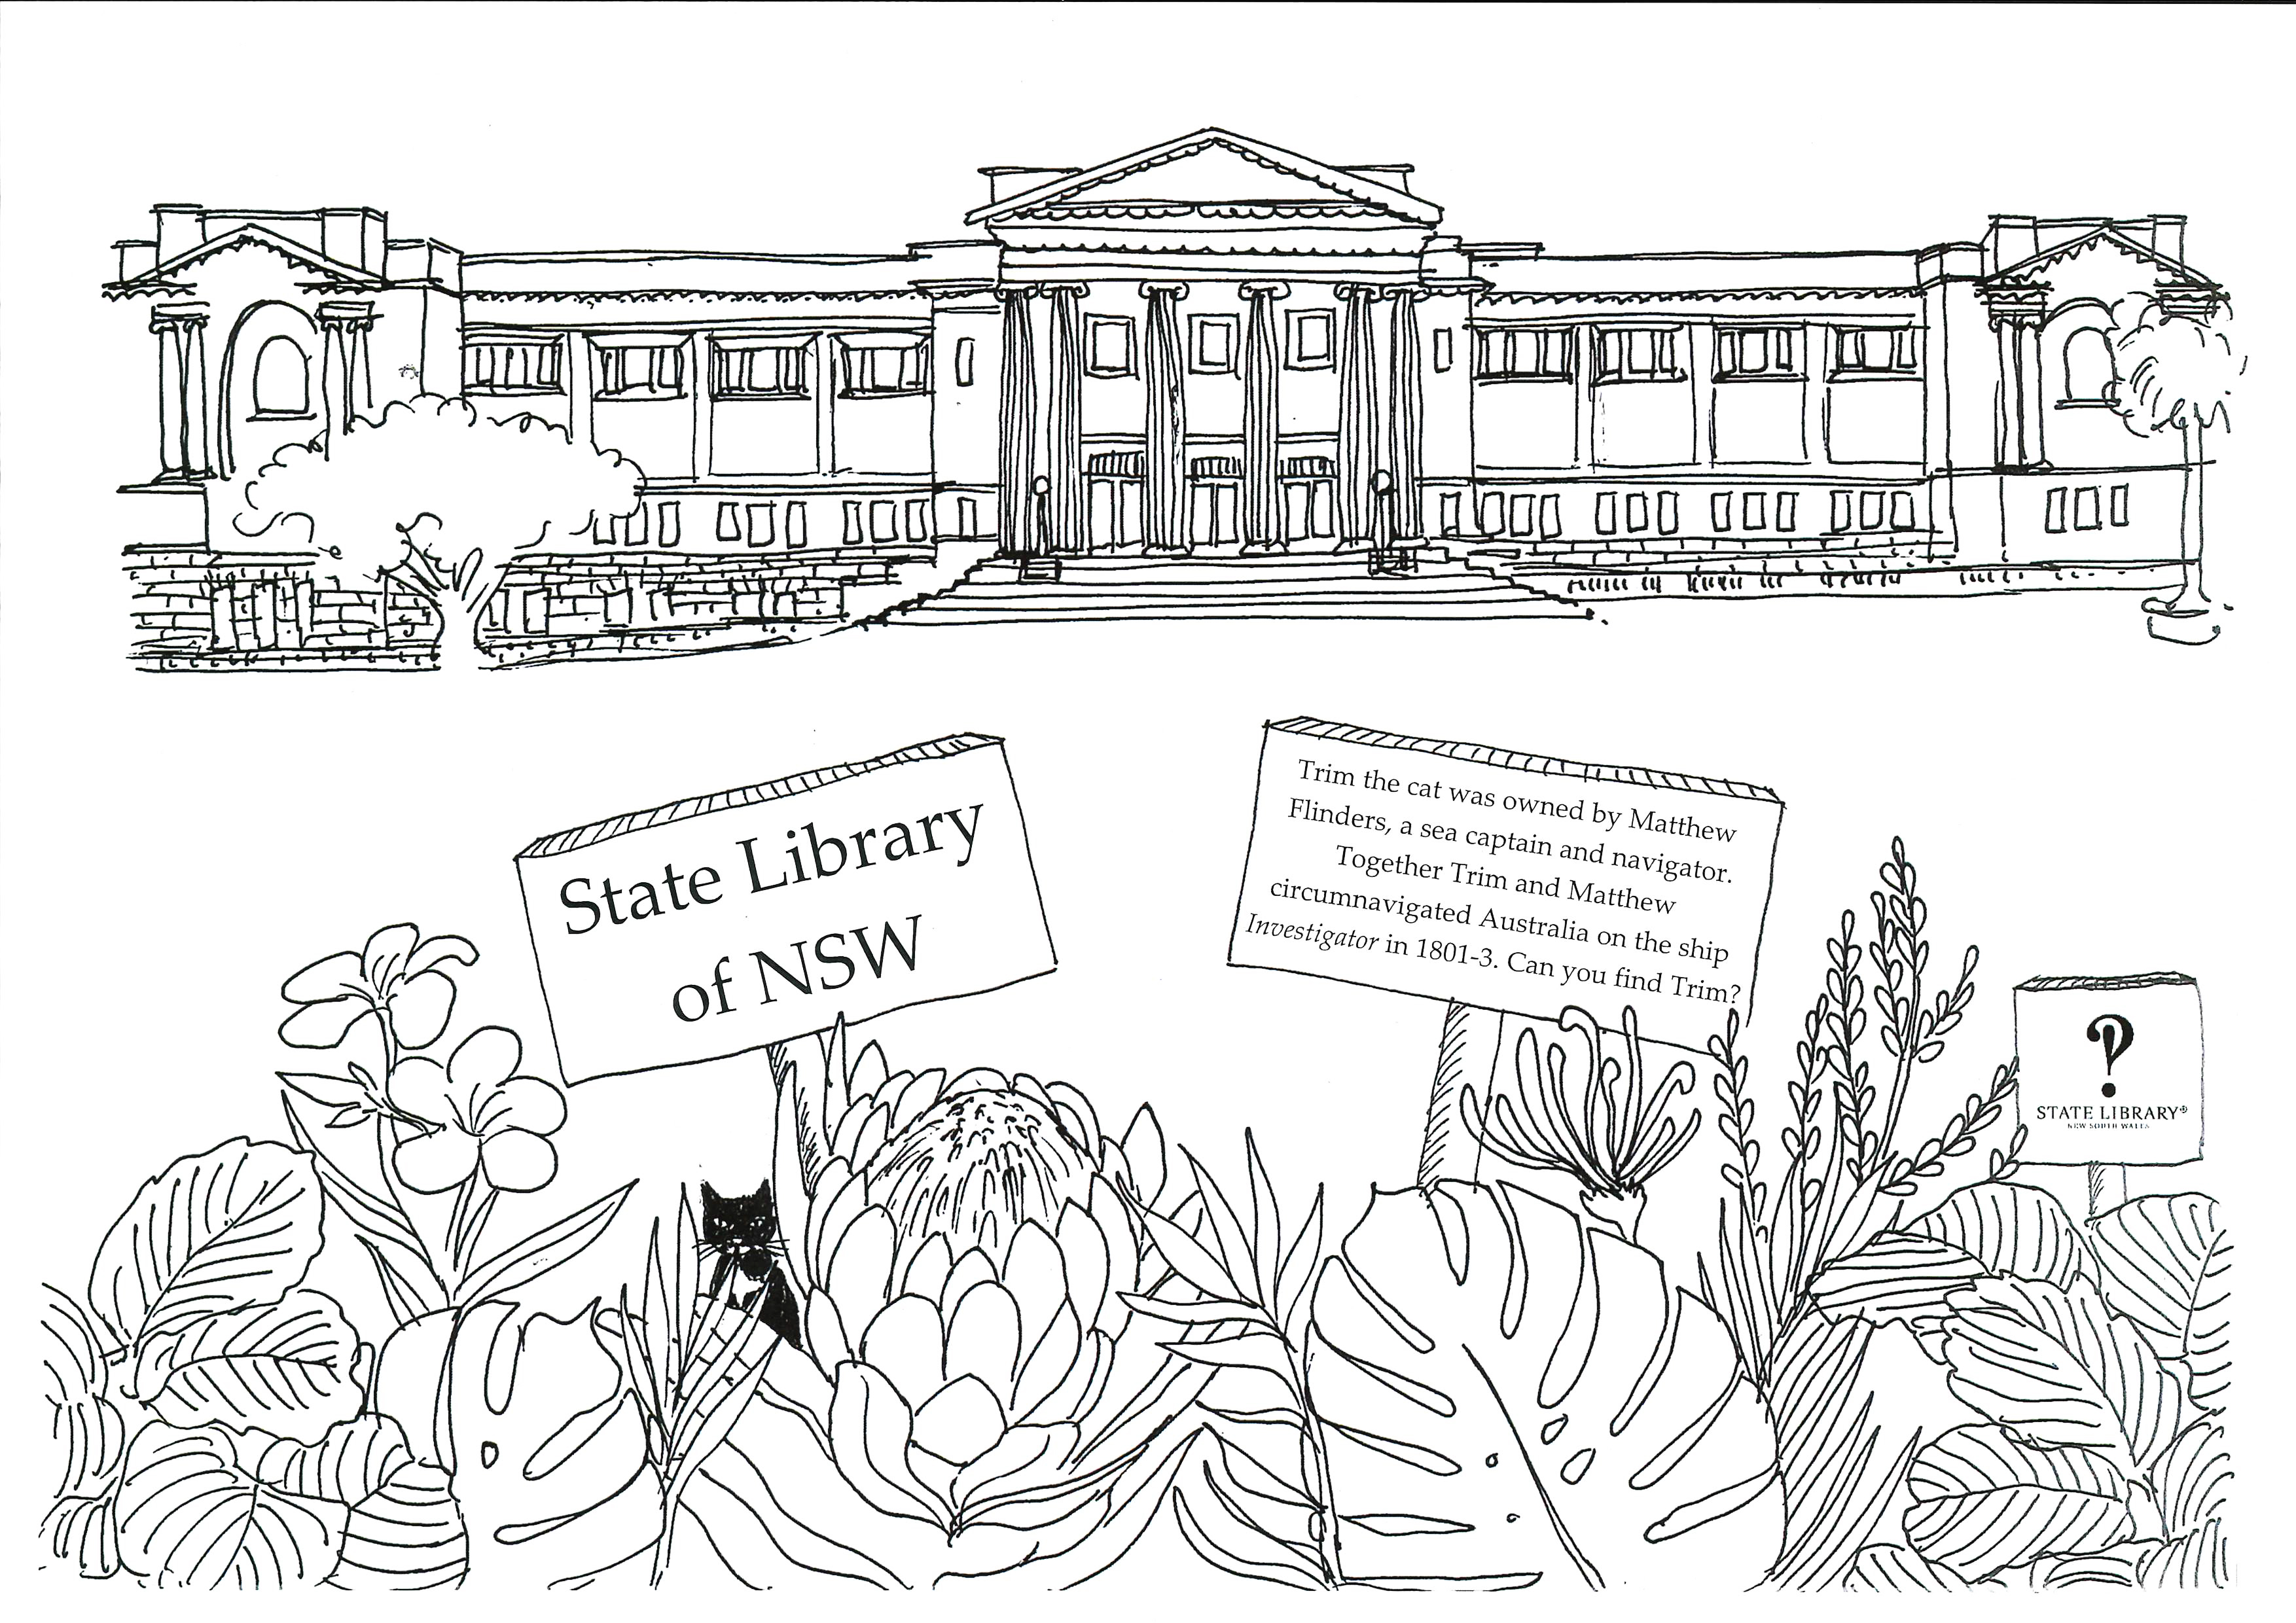 A black line drawing of the State Library of NSW